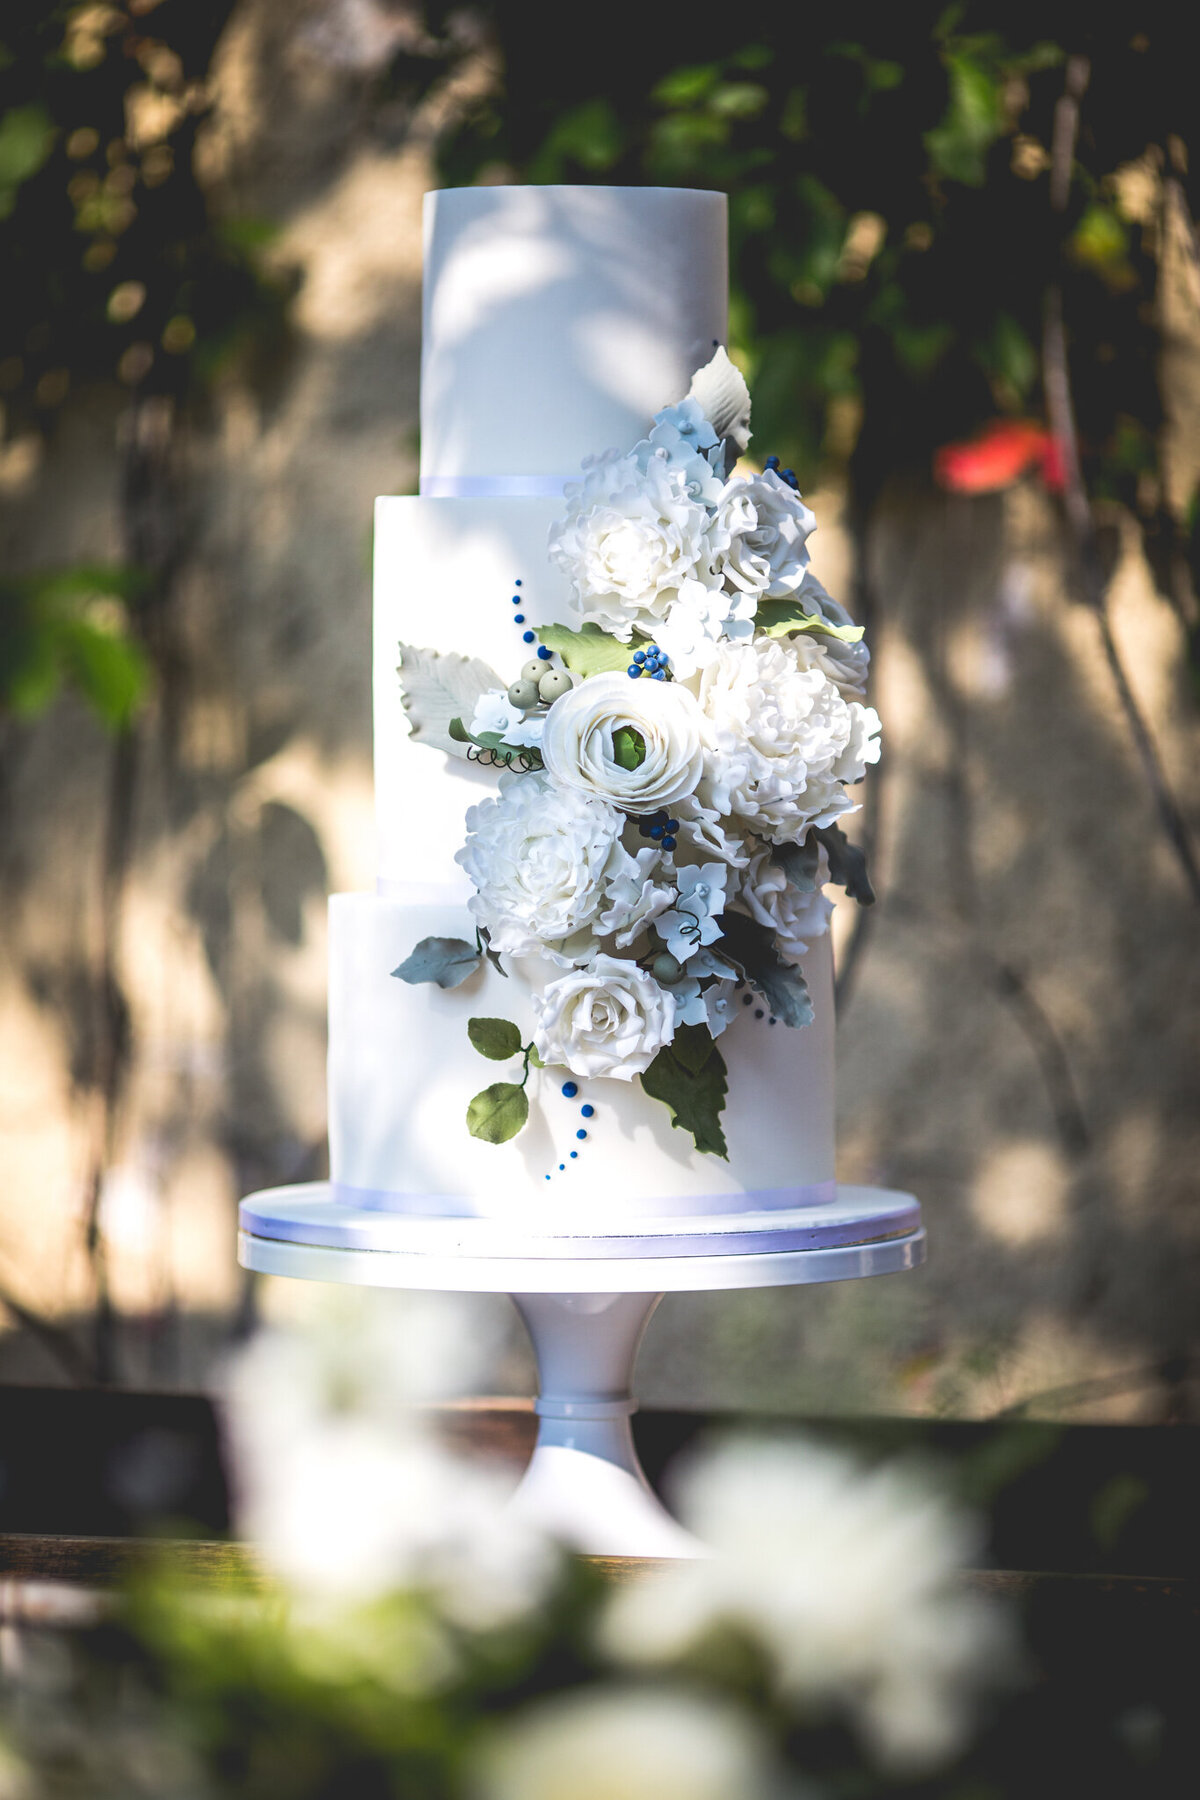 Elegant and romantic, three-tiered wedding cake with blue and purple  cascading florals, by Yvonne's Delightful Cakes, classic cakes & desserts in Calgary, Alberta, featured on the Brontë Bride Vendor Guide.